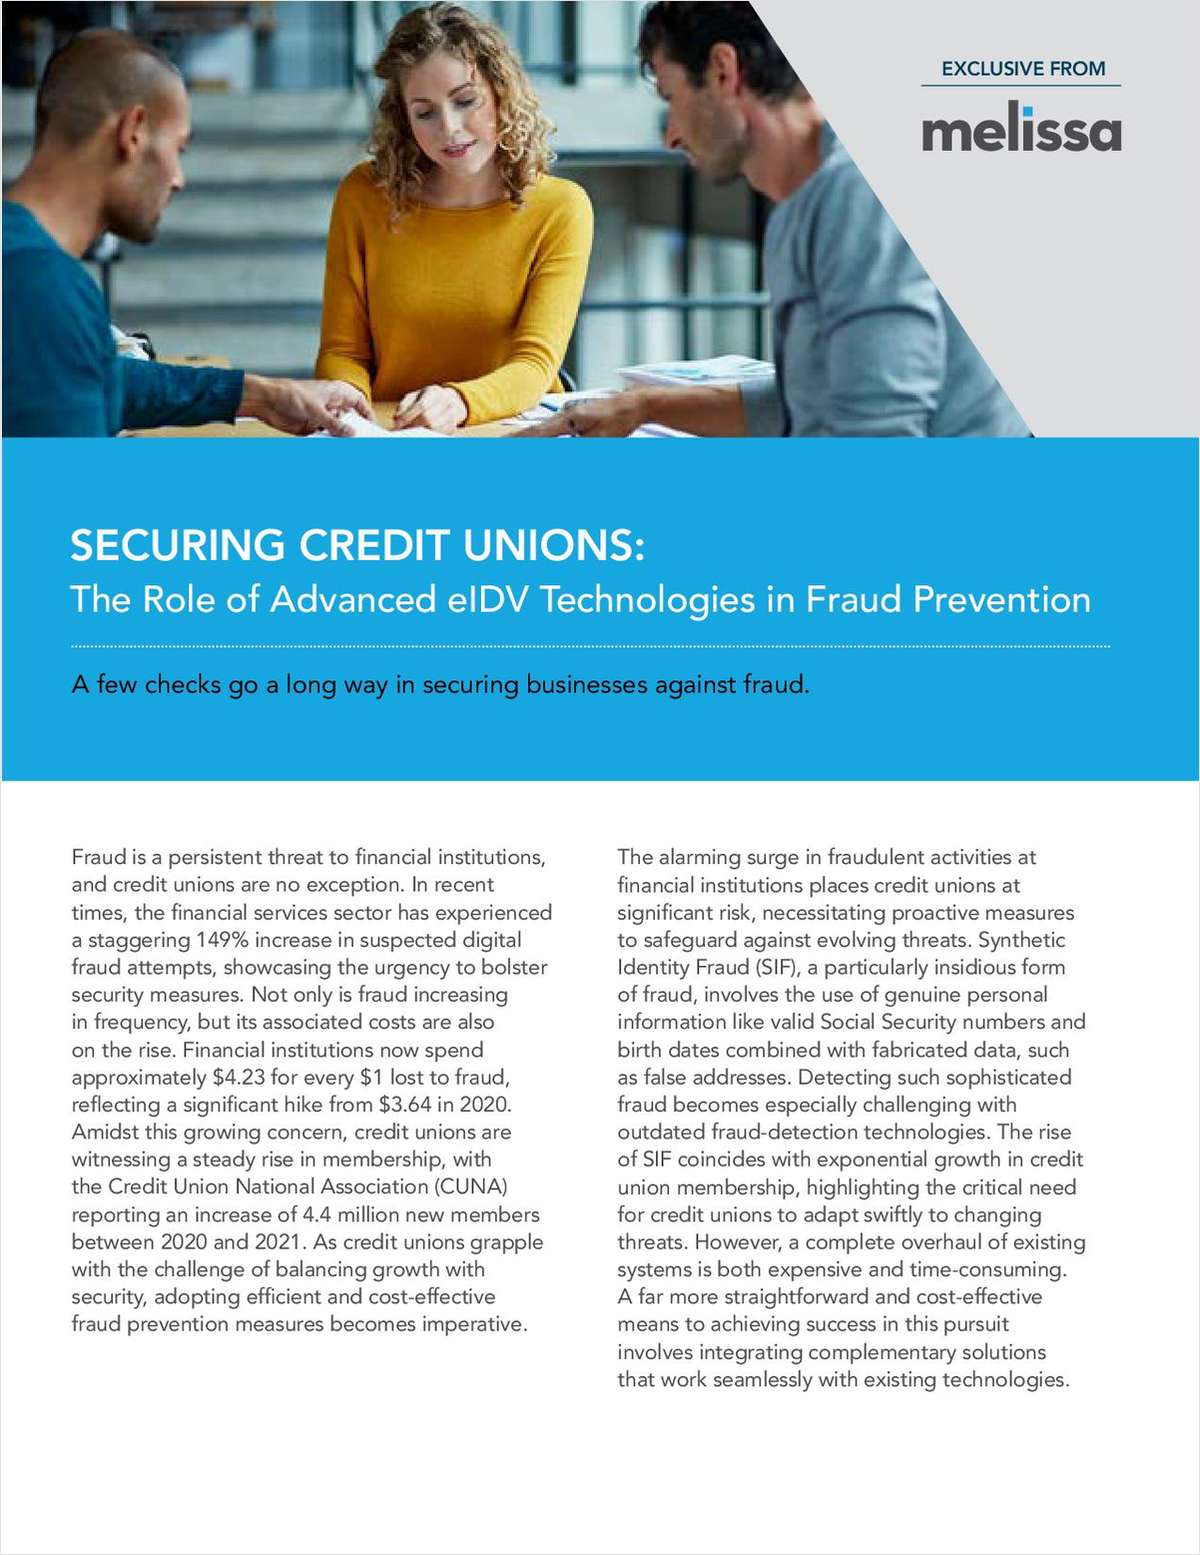 Securing Credit Unions: The Role of Advanced eIDV Technologies in Fraud Prevention link